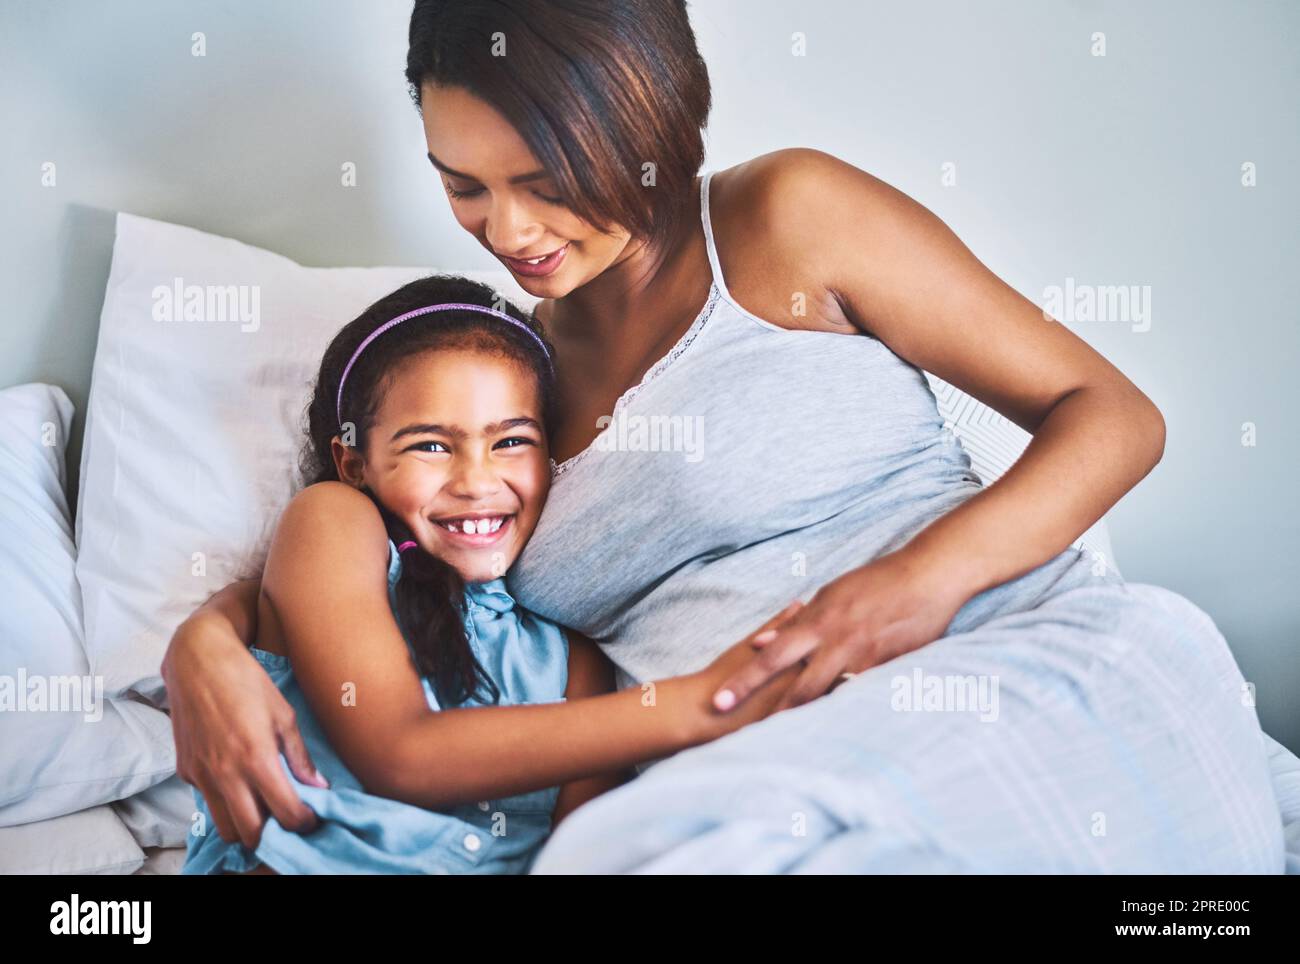 You will always be my firstborn. Portrait of a cheerful little girl relaxing on the bed with her pregnant mother at home during the day. Stock Photo